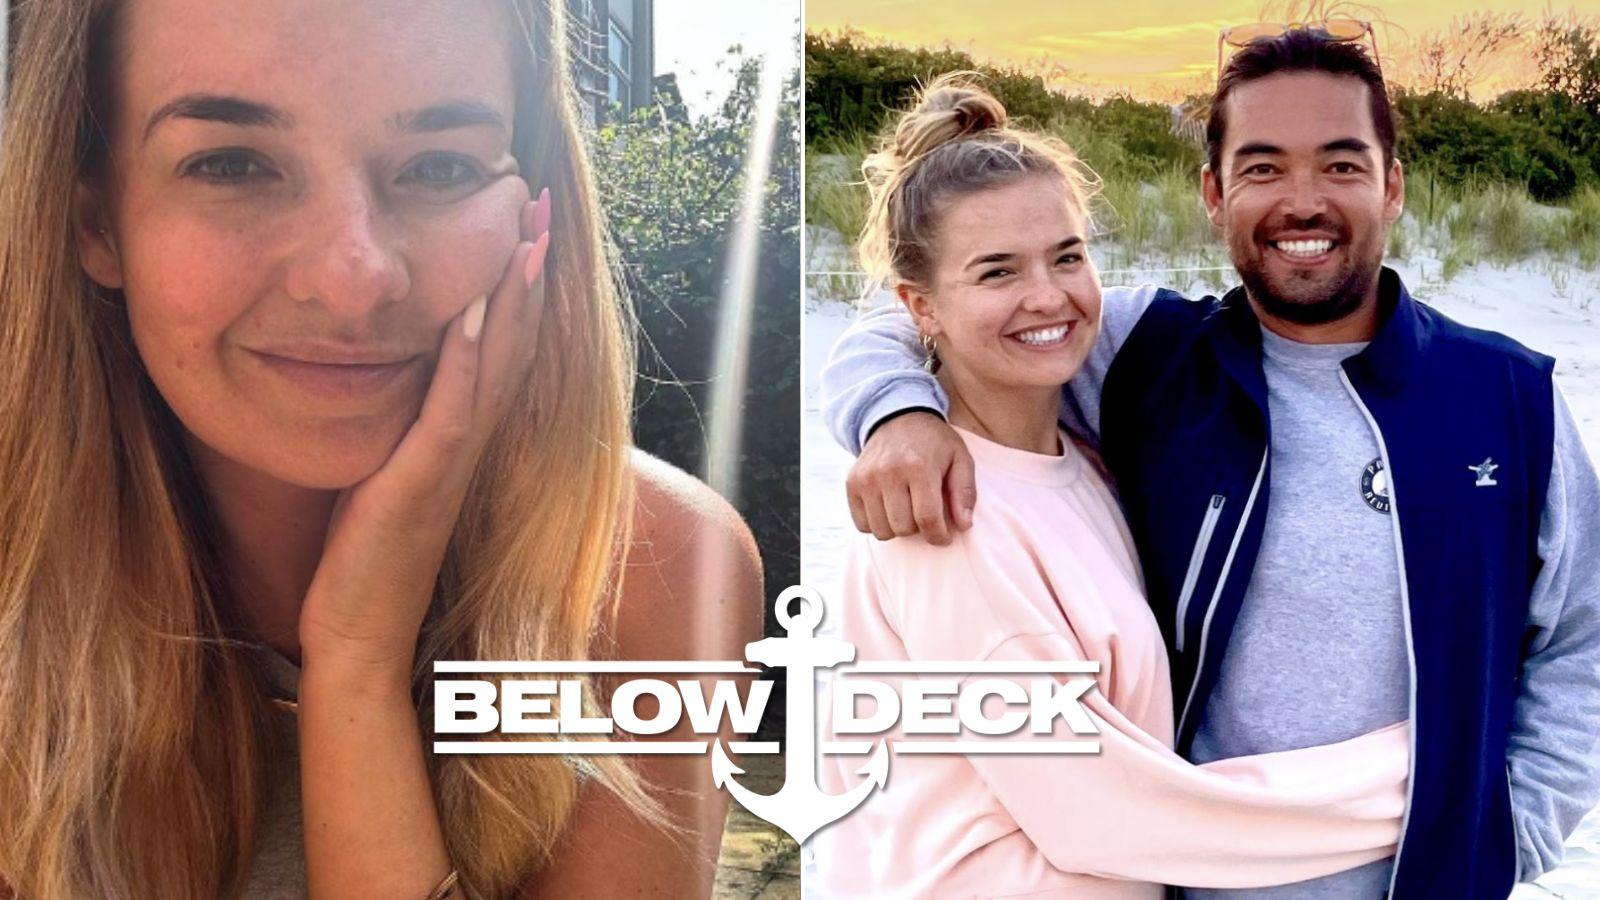 Colin Macrae and Daisy Kelliher from Below Deck Sailing Yacht